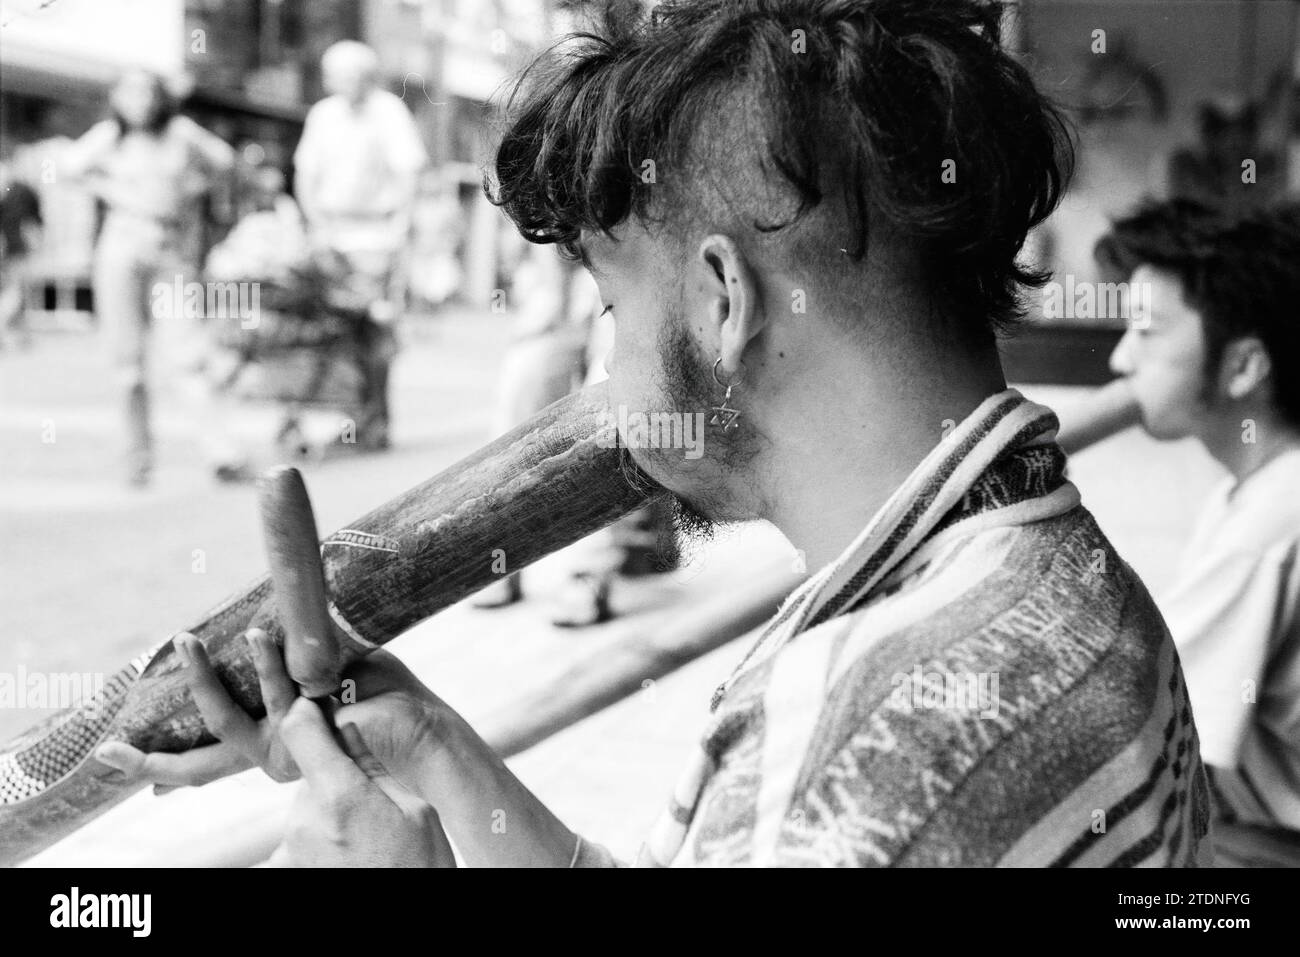 Didgeridoo player in Barteljorisstraat, Haarlem, Barteljorisstraat, The Netherlands, 23-08-1994, Whizgle News from the Past, Tailored for the Future. Explore historical narratives, Dutch The Netherlands agency image with a modern perspective, bridging the gap between yesterday's events and tomorrow's insights. A timeless journey shaping the stories that shape our future Stock Photo